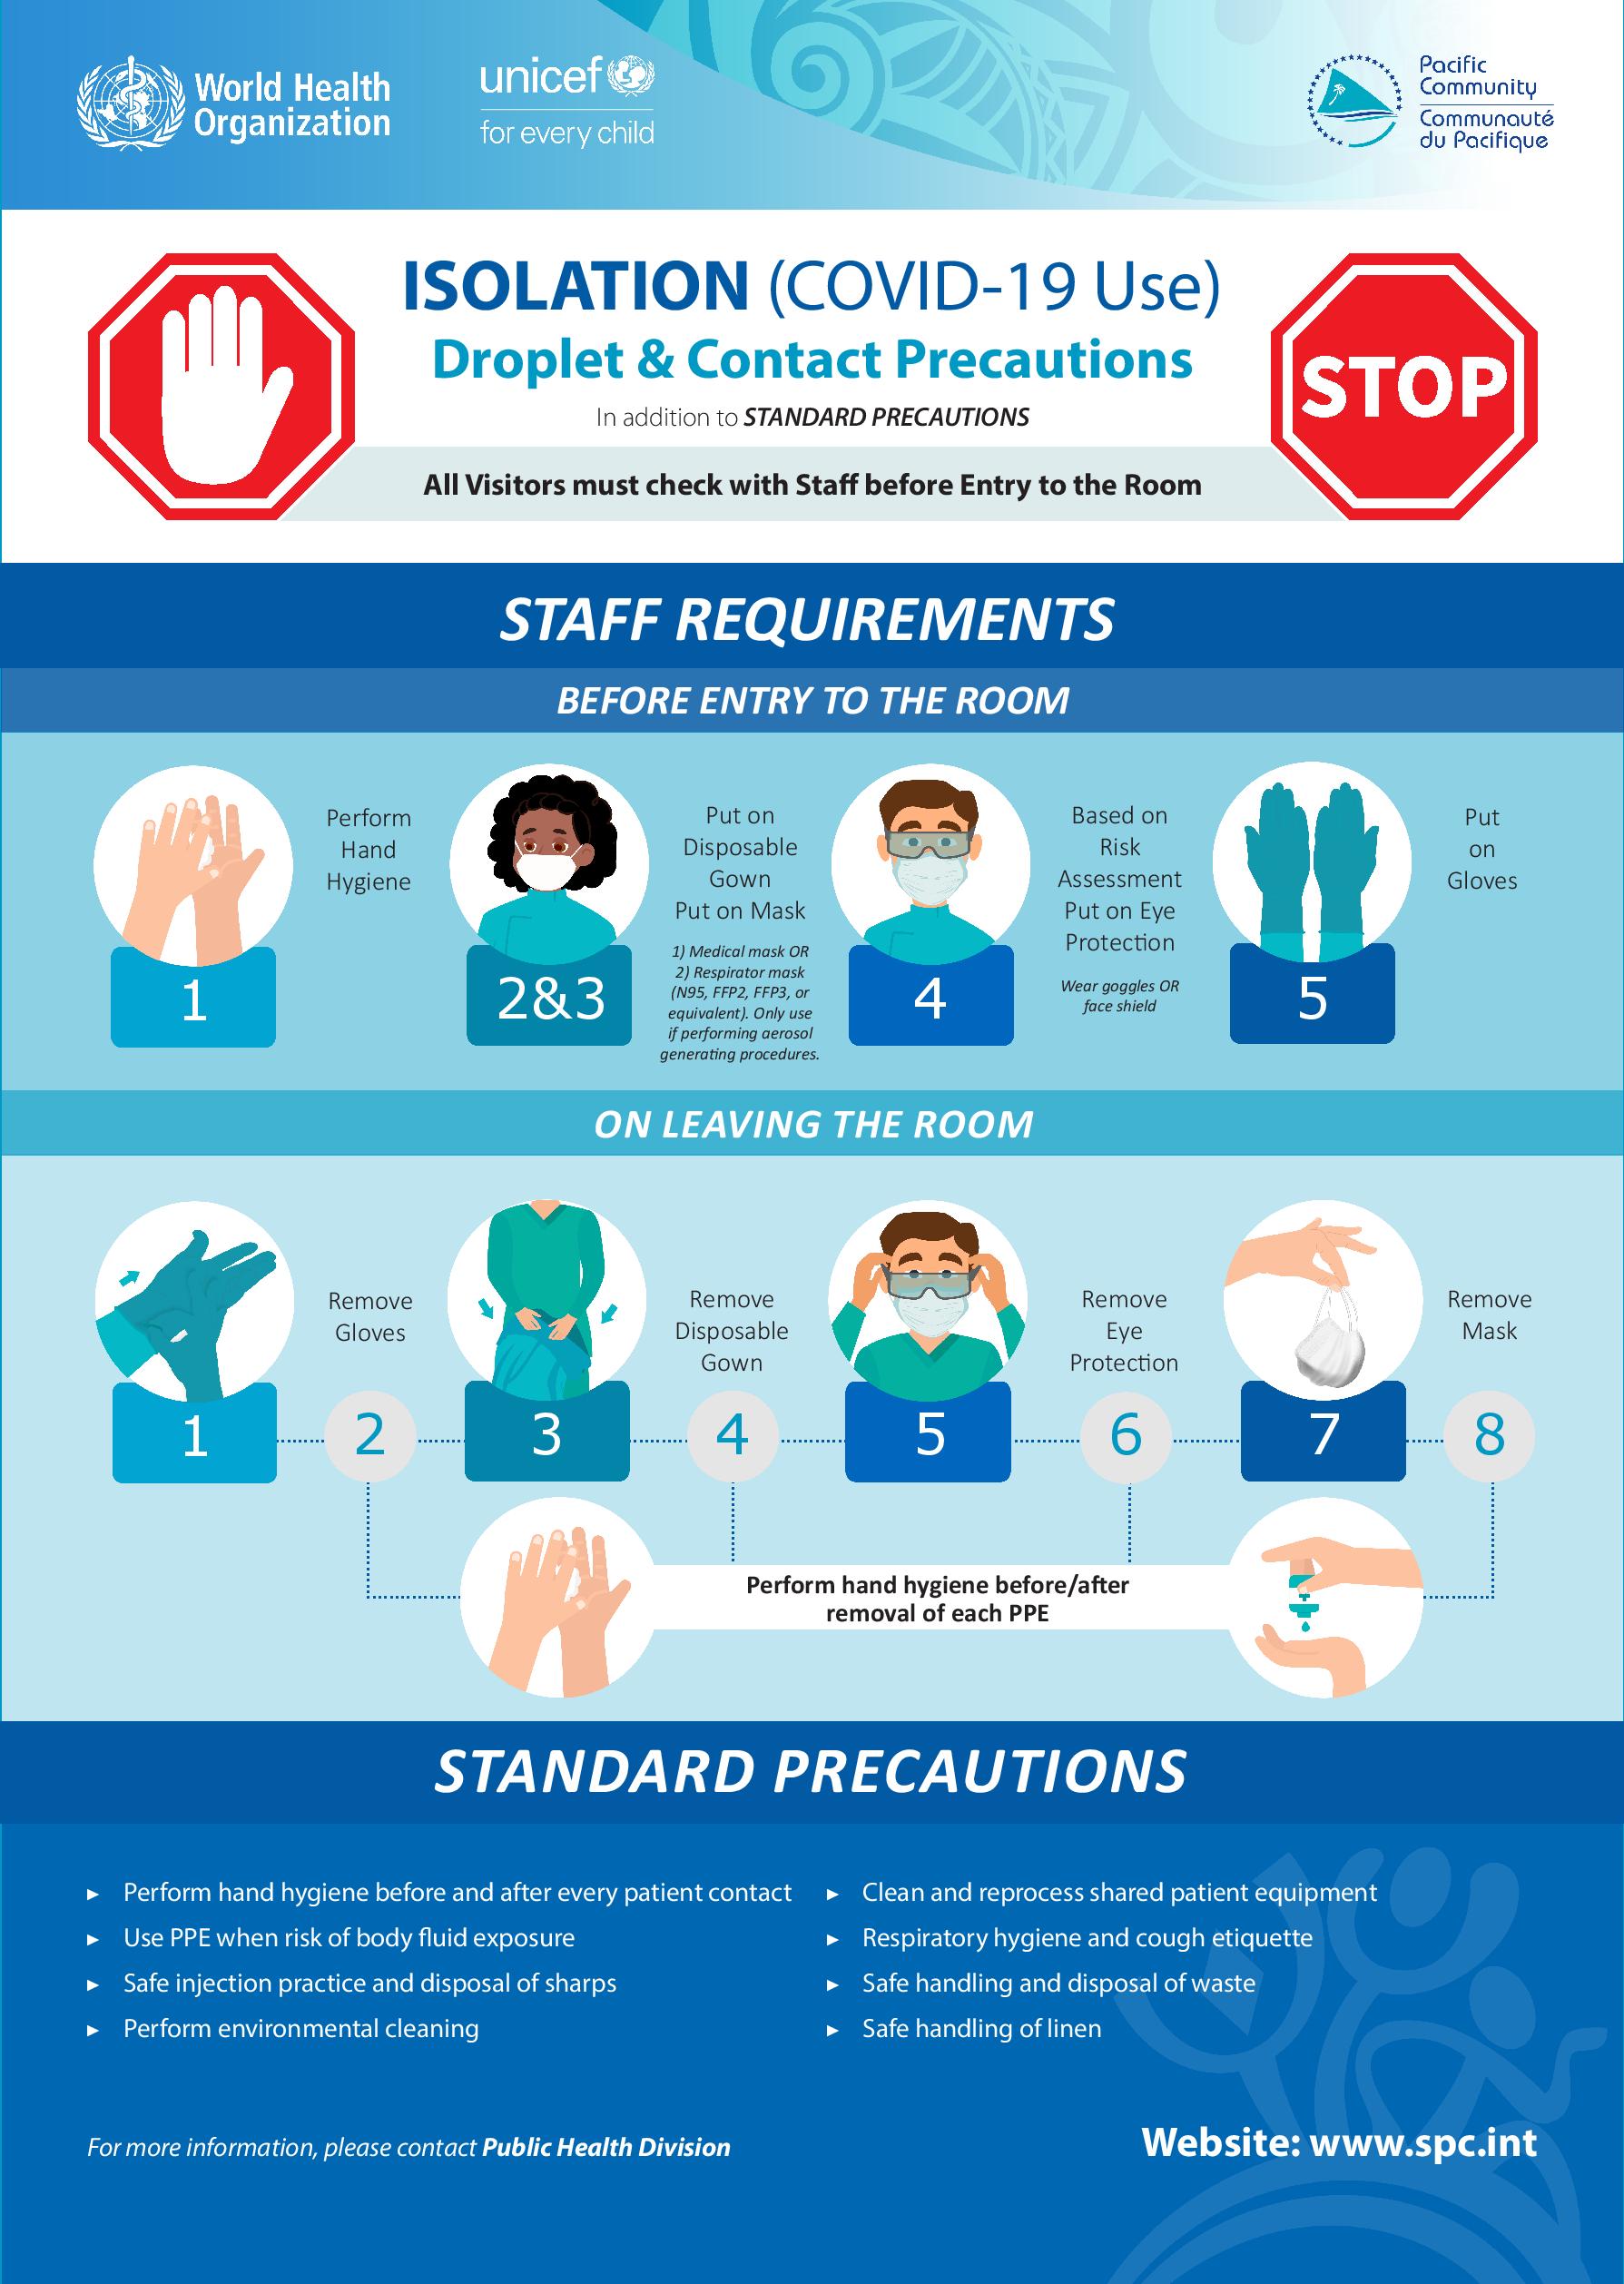 A3 Poster 4 Contact And Droplet Precautions COVID USE (002) Page 001 